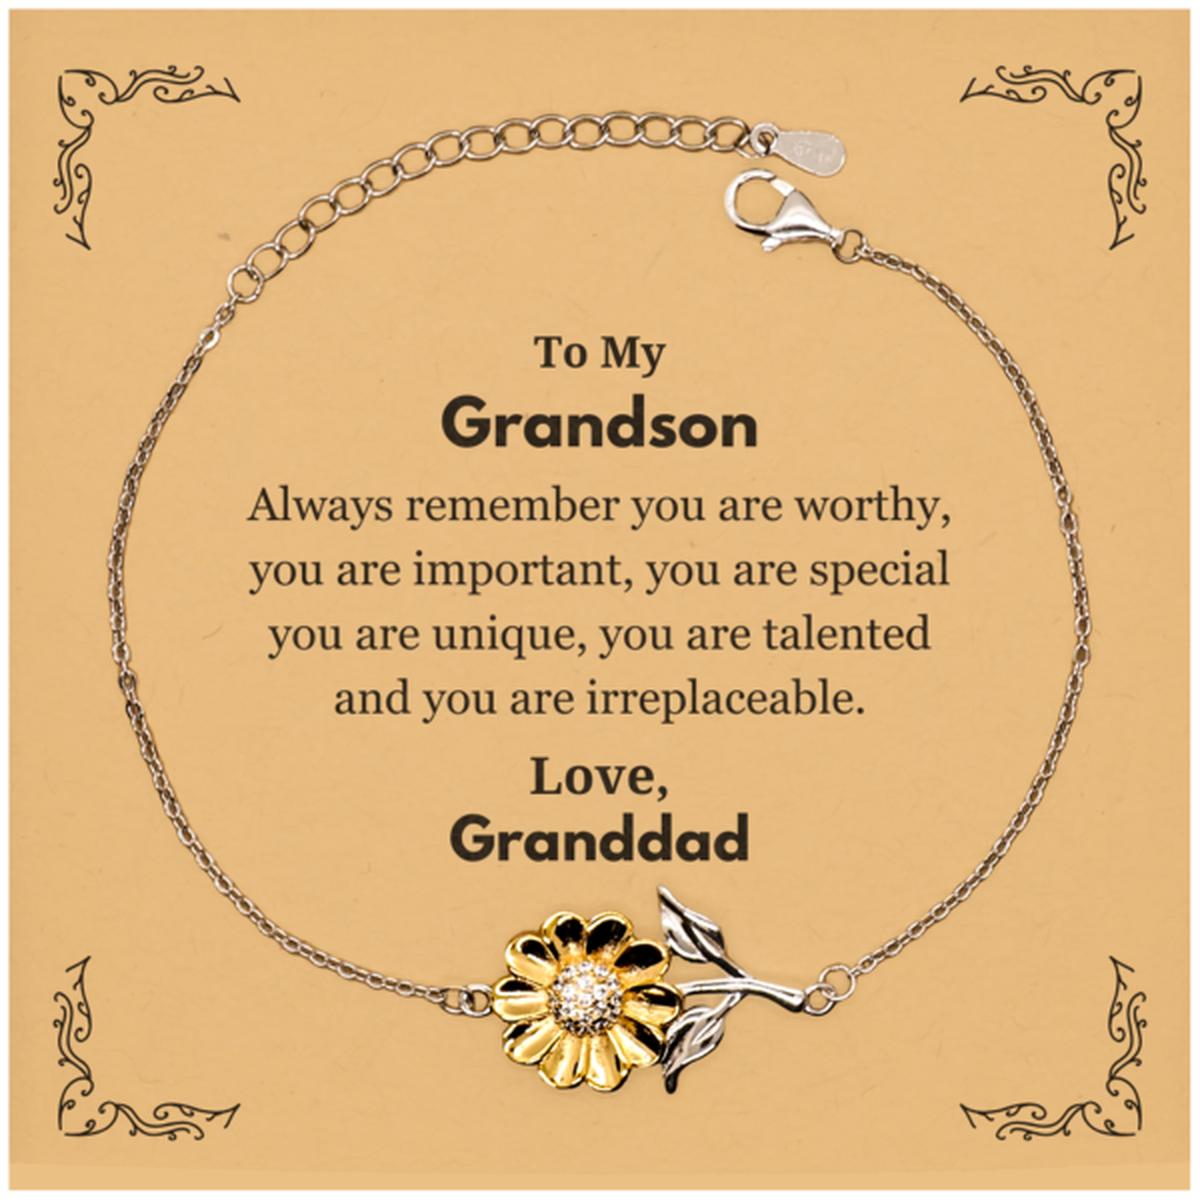 Grandson Birthday Gifts from Granddad, Inspirational Sunflower Bracelet for Grandson Christmas Graduation Gifts for Grandson Always remember you are worthy, you are important. Love, Granddad